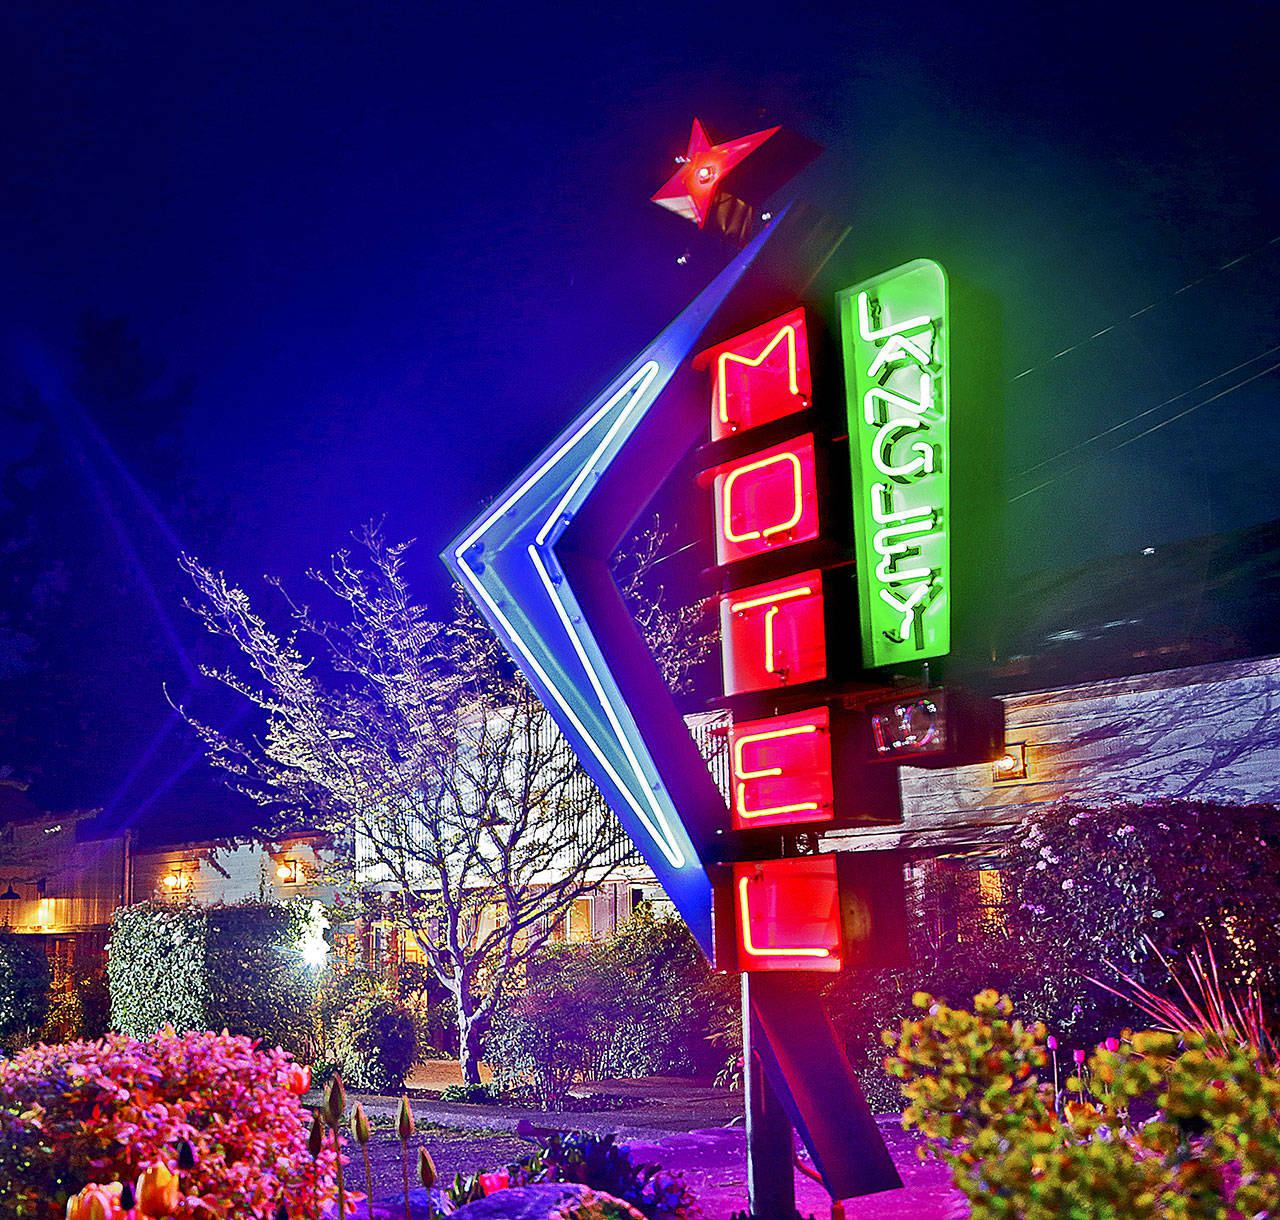 The 9-foot Langley Motel neon sign by Tim Leonard is the city’s unofficial welcome sign. The motel owners wanted a retro Vegas-style sign. (Michael Stadler / Stadler Studio Photography)